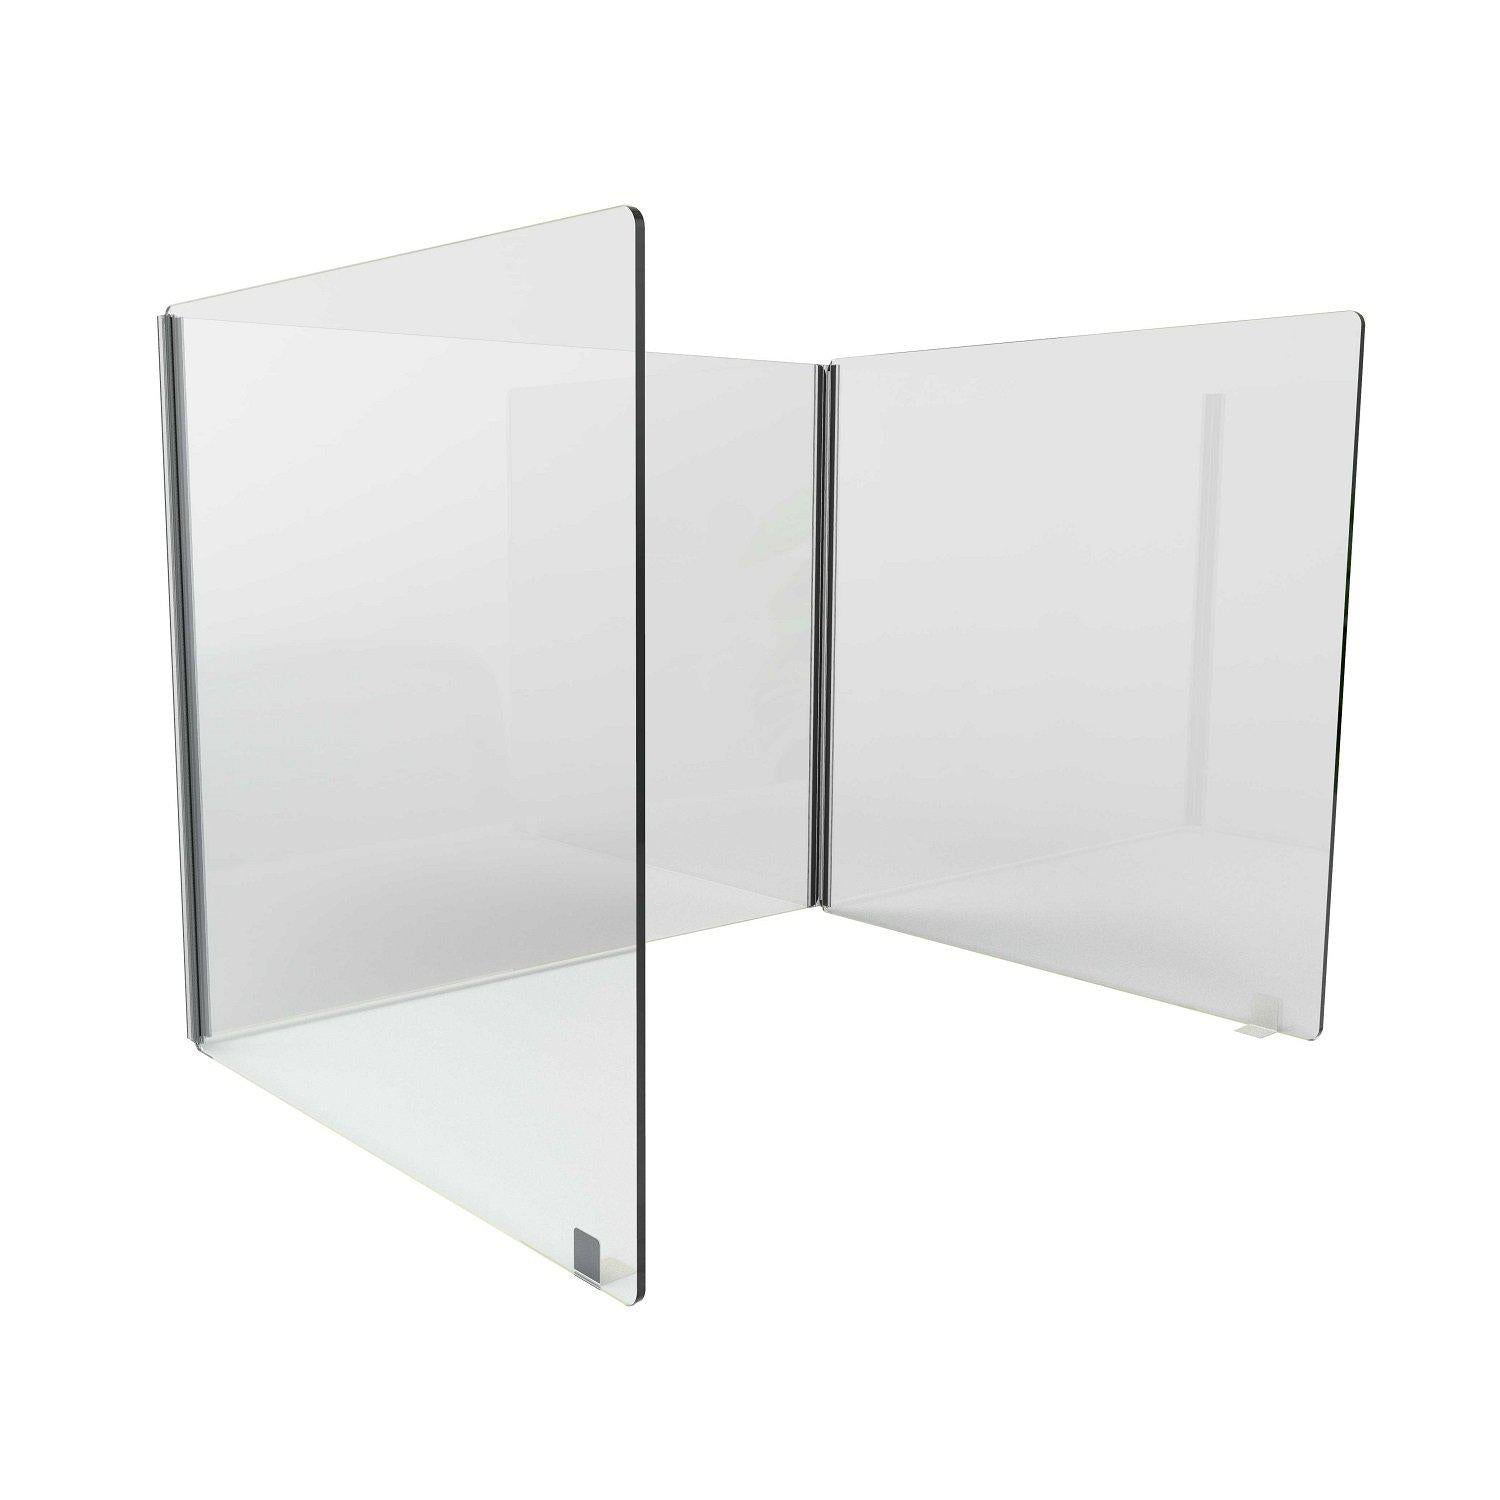 3-Sided Clear Thermoplastic Desktop Protection Screen/Sneeze Guard, 24”H x 60”W x 16”D